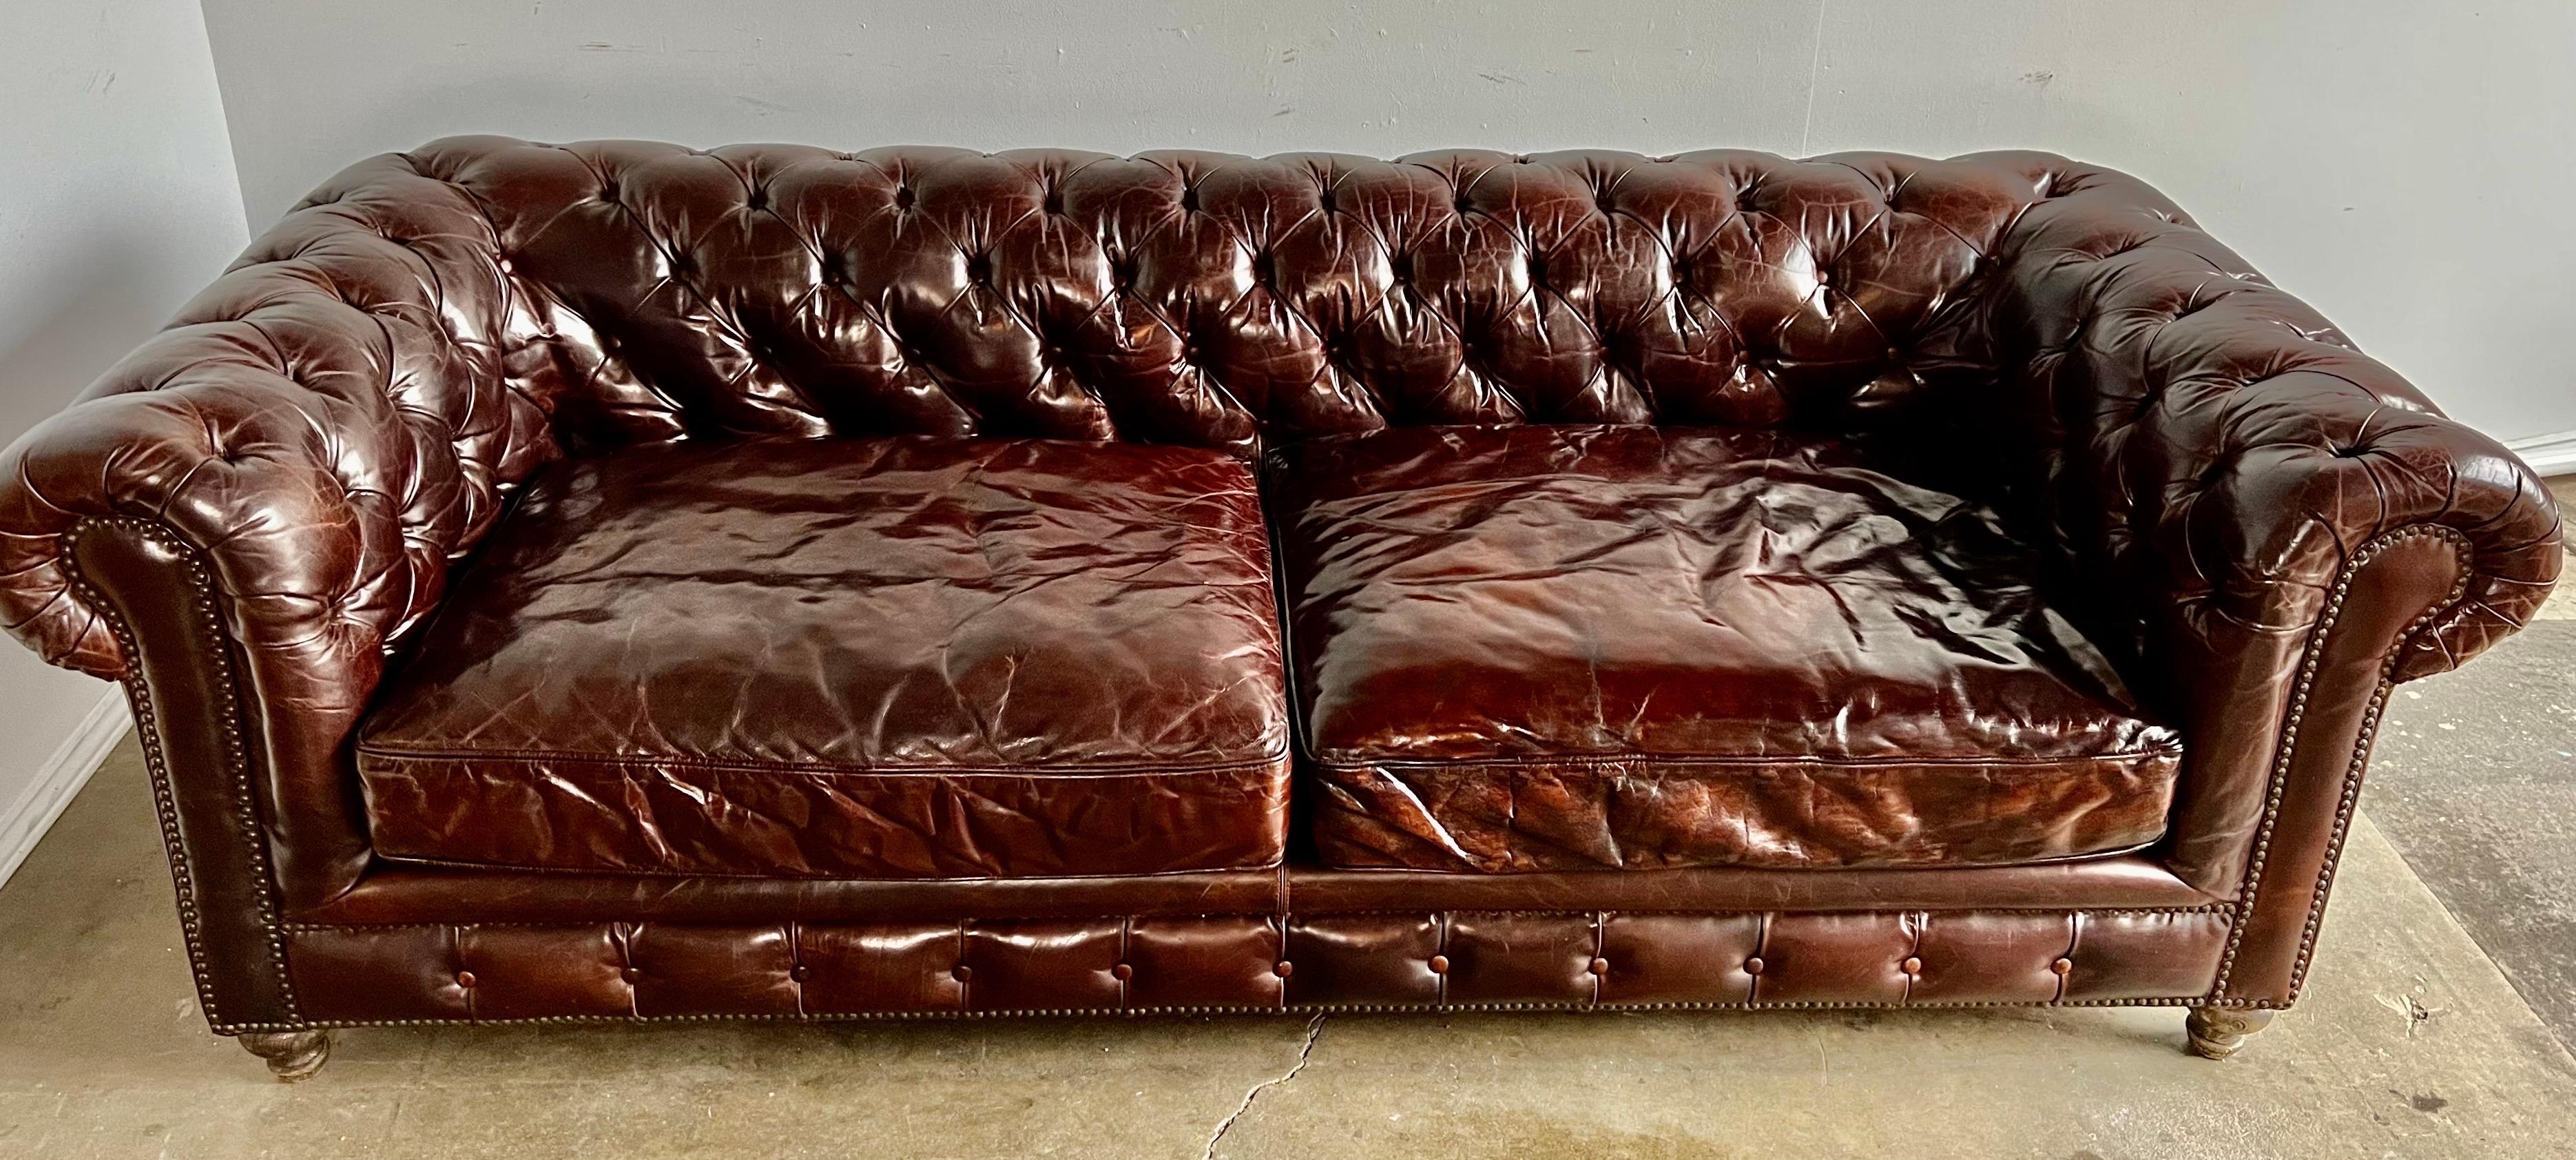 Handsome English leather tufted sofa with tight tufted back and two loose seat cushions. The sofa is beautifully detailed with brass nailhead trim. Wonderfully worn with no tears of holes in the leather.